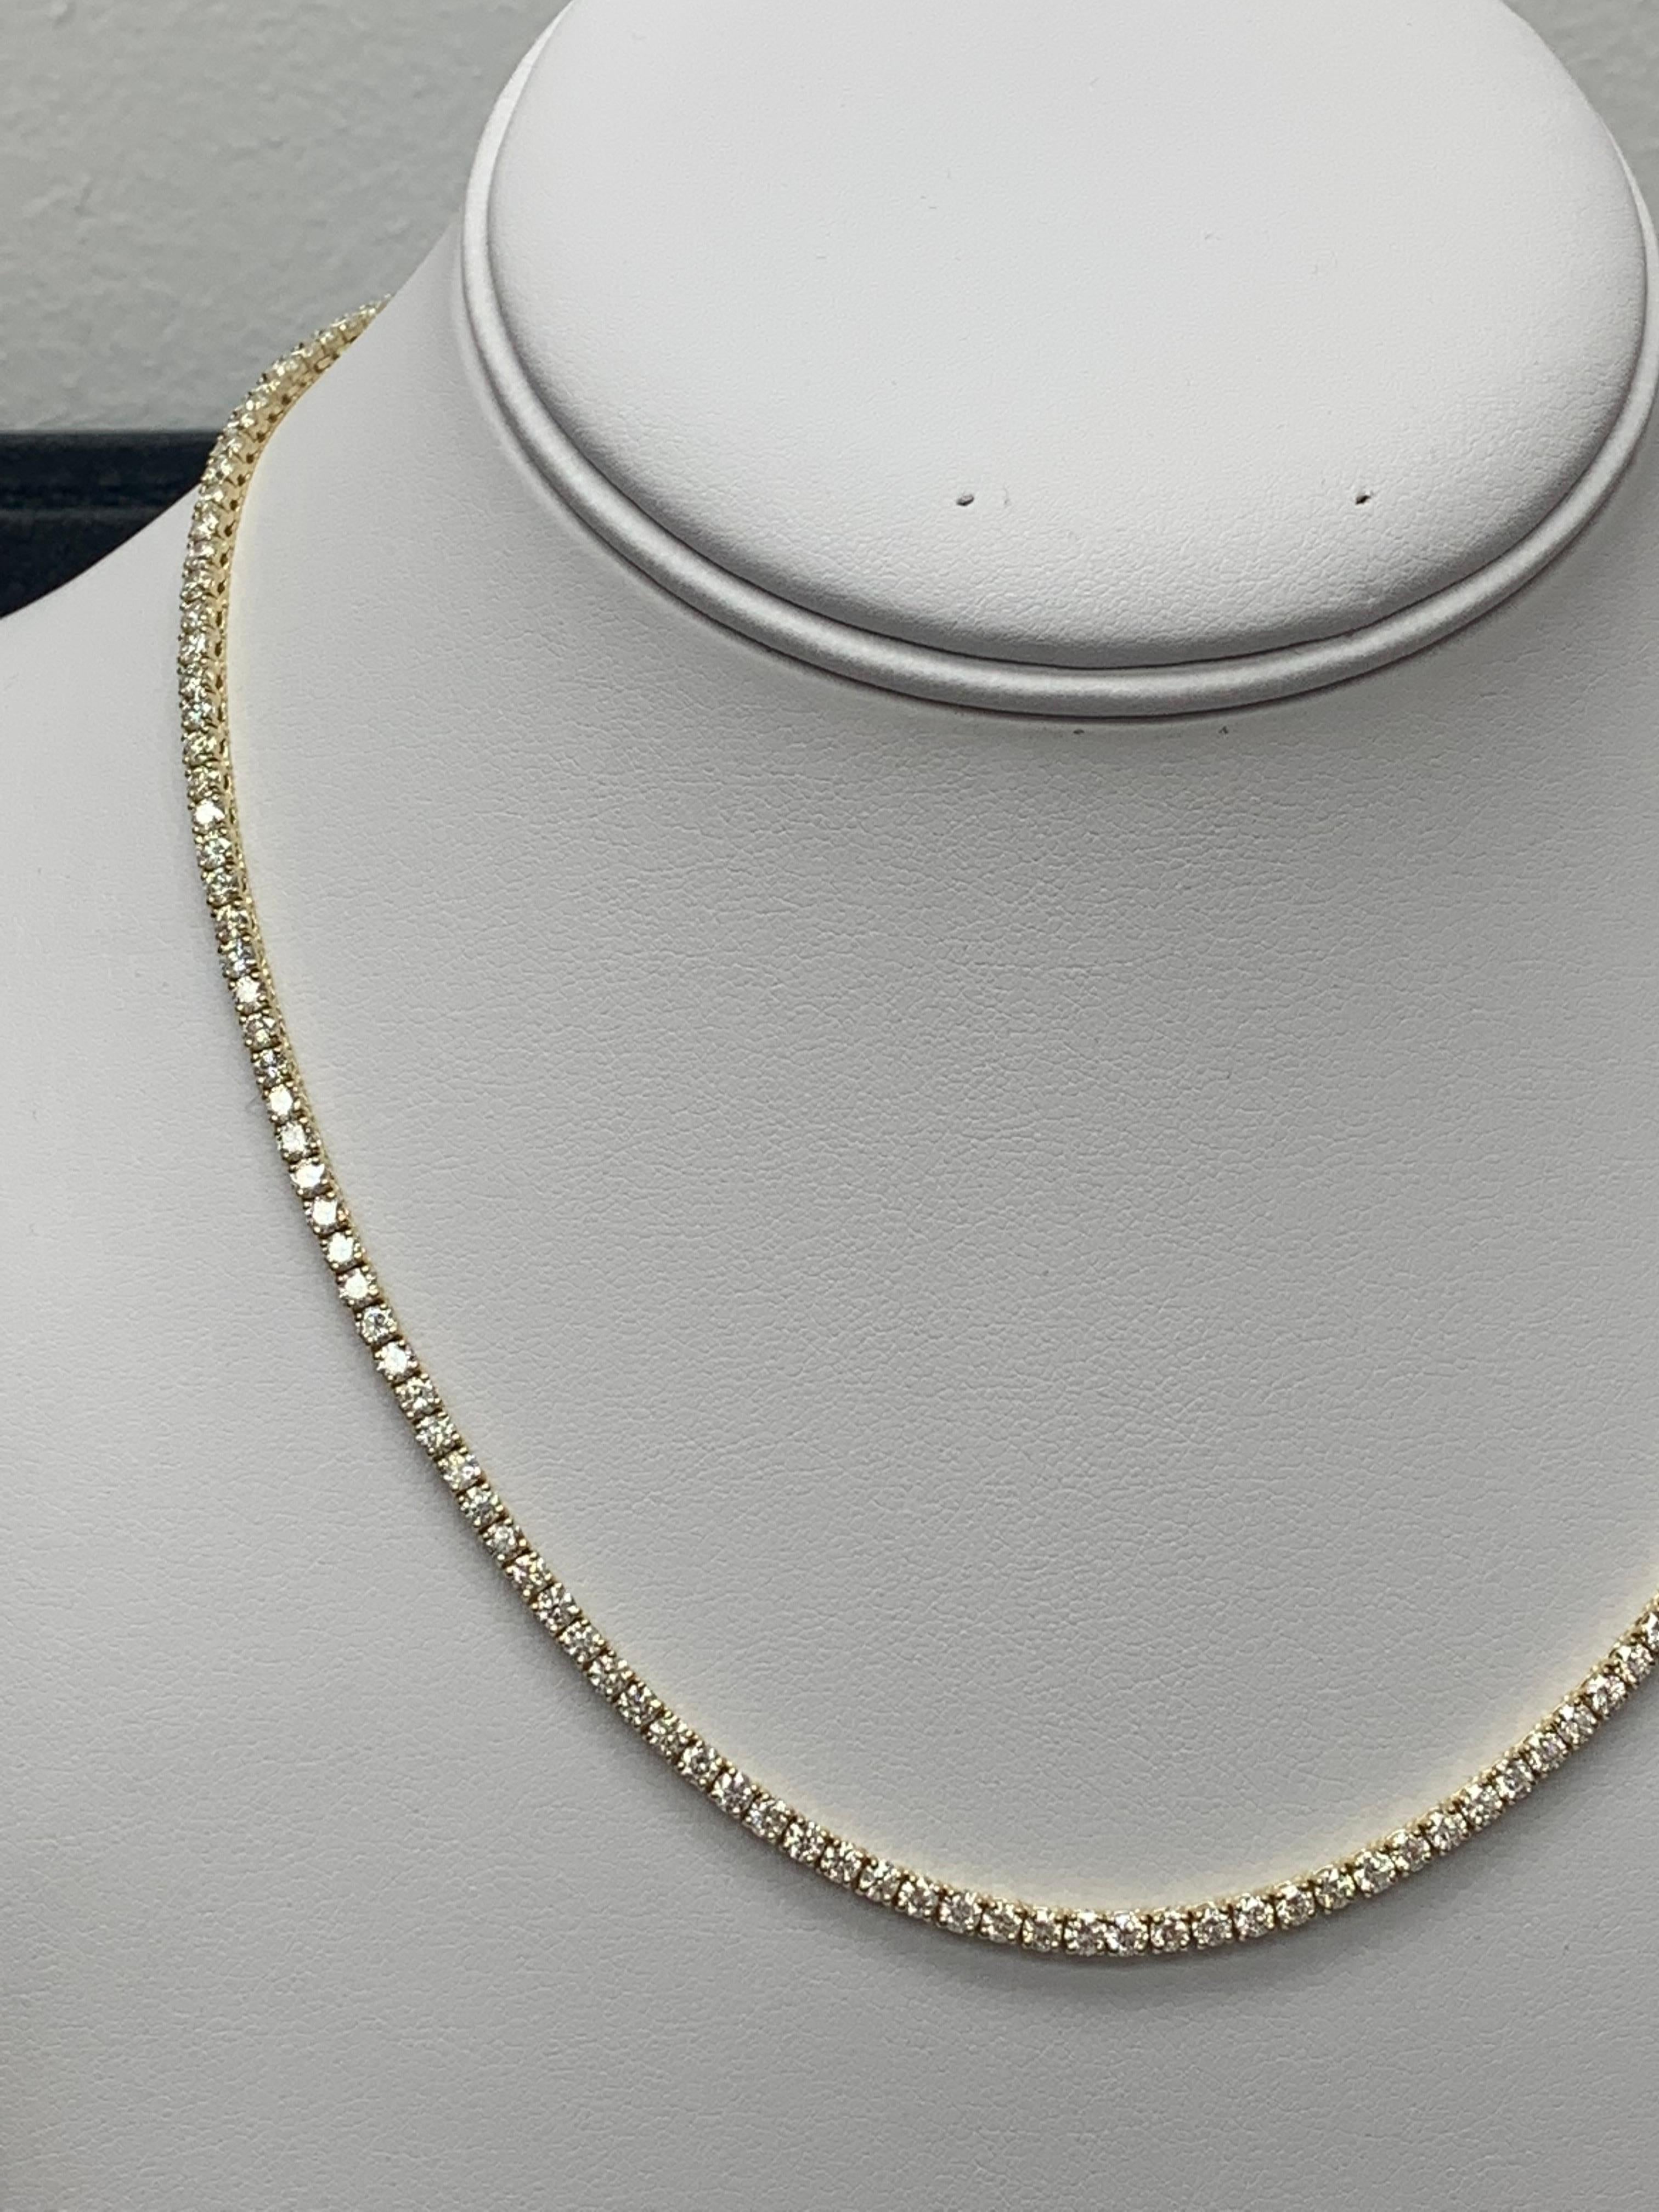 11.31 Carat Diamond Tennis Necklace in 14K Yellow Gold For Sale 1